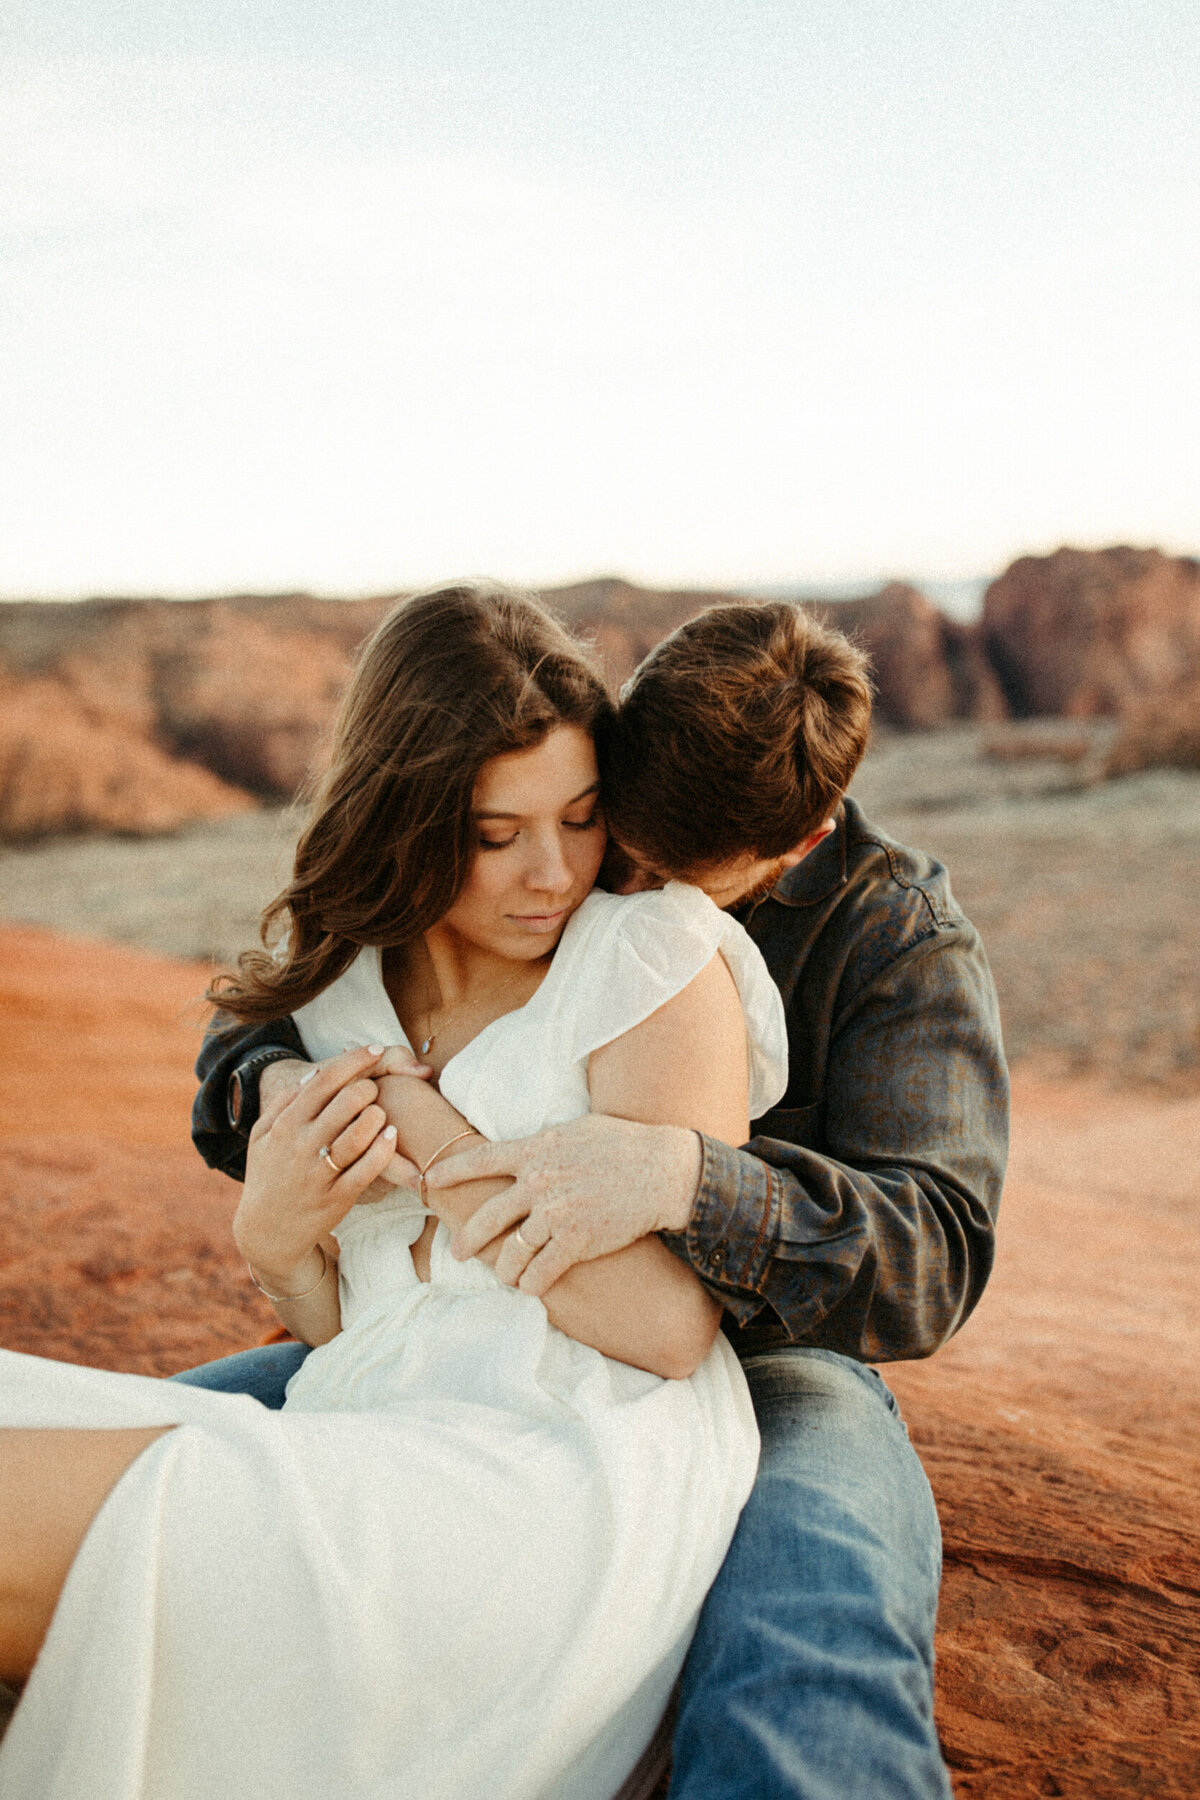 Guy snuggling his fiancé as they sit on a rock in the desert with cliffs in the background